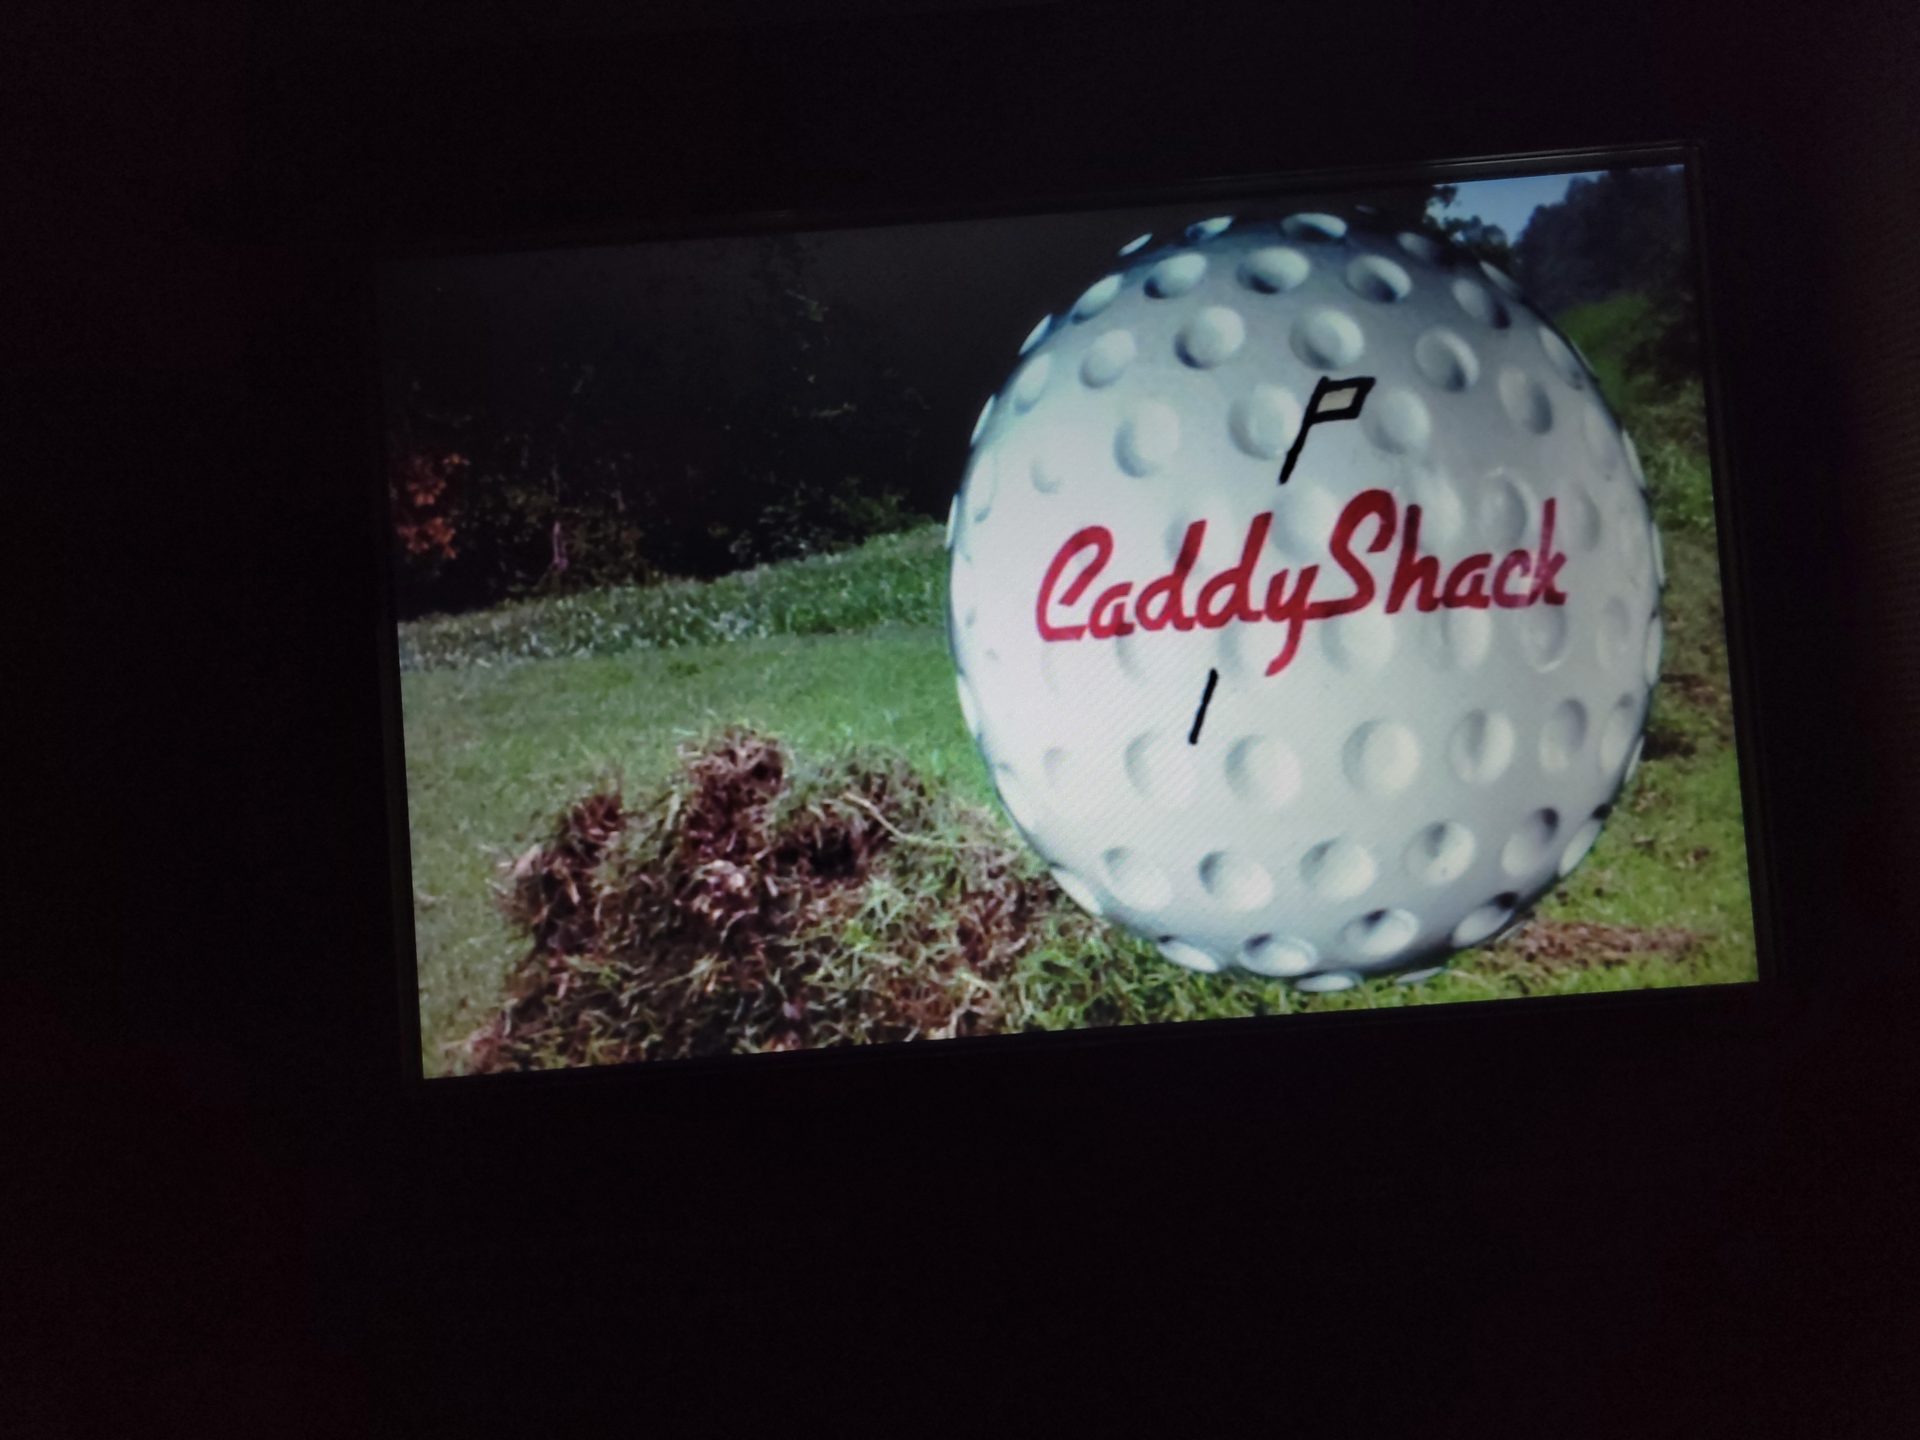 a golf ball on a television screen